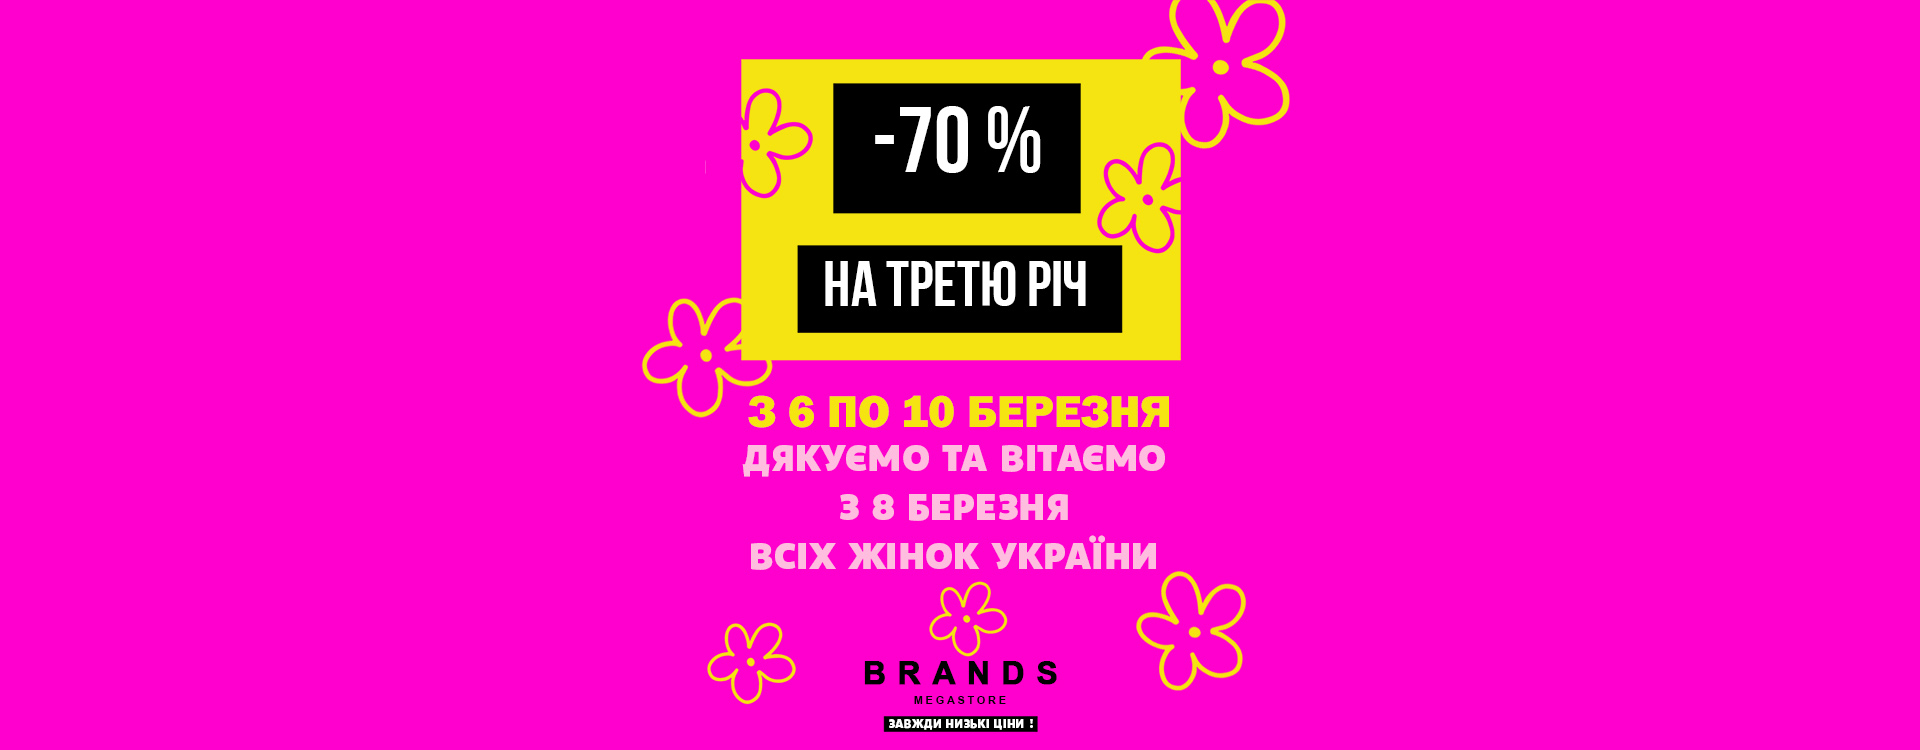 Brands Outlet дарує знижку -70%